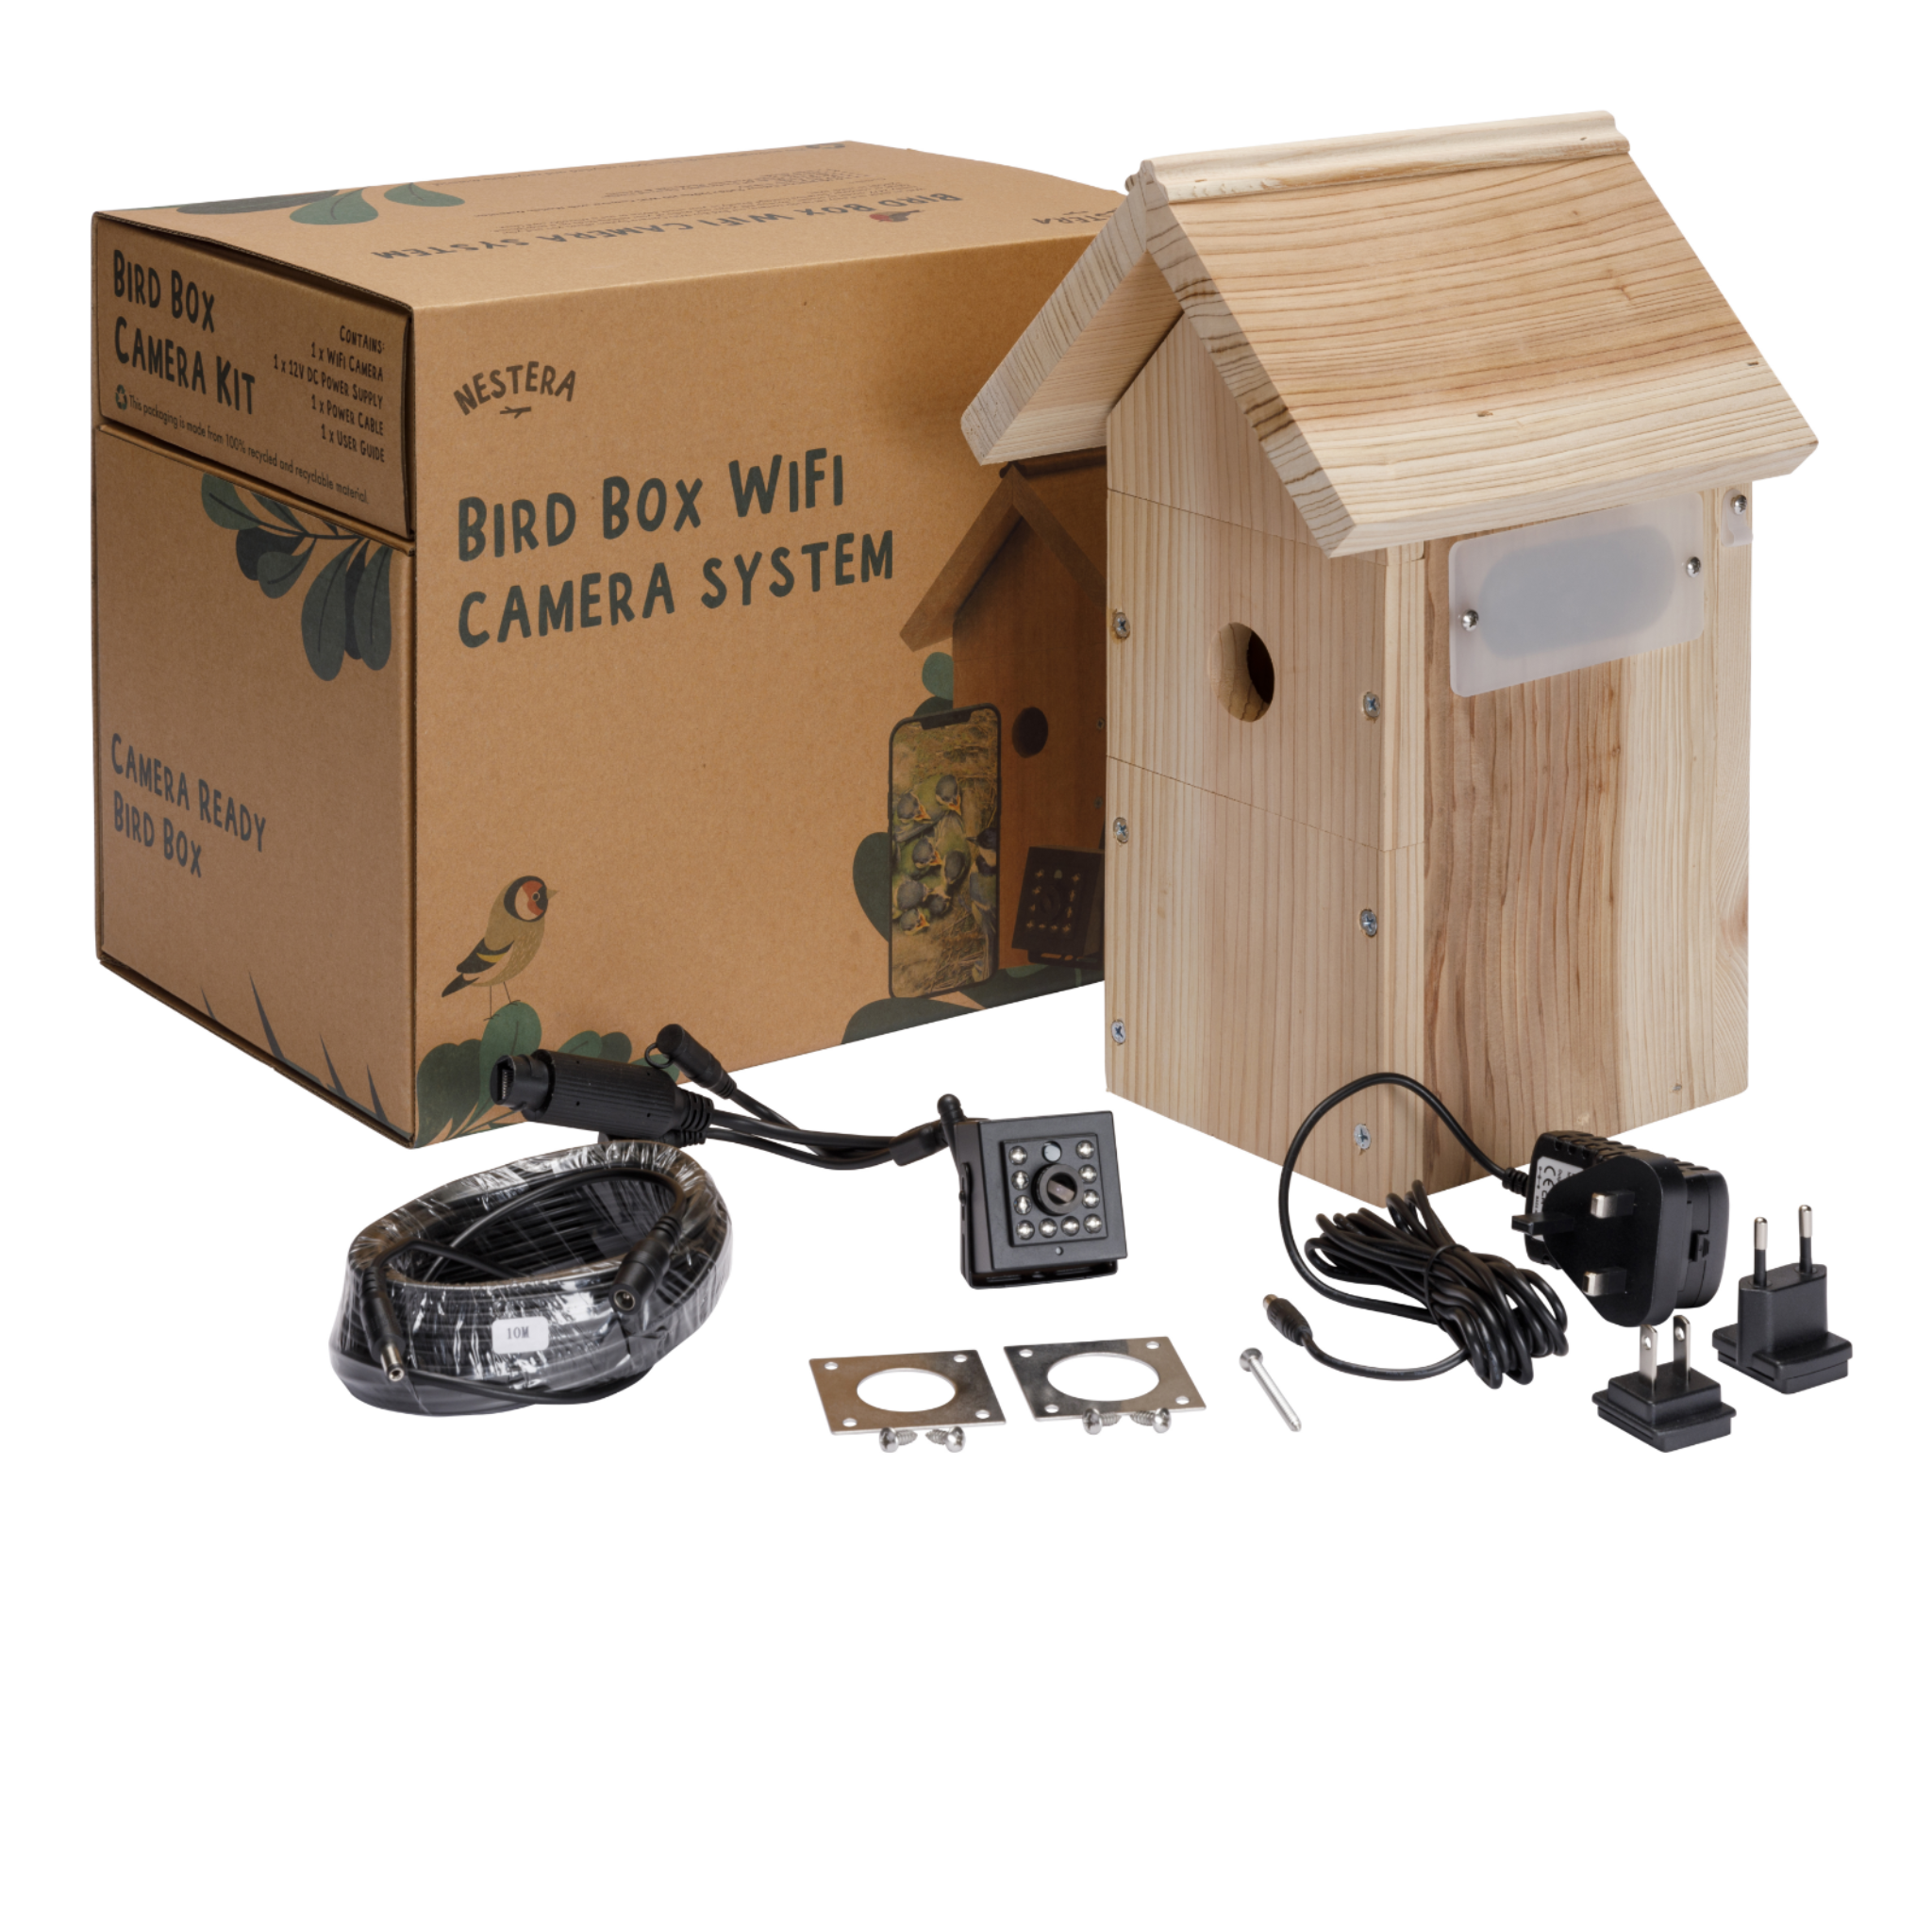 Hatching Time Nestera. Bird Box wifi camera system box can be seen with cables, camera, bird house, cords and mounting hardware in photo.